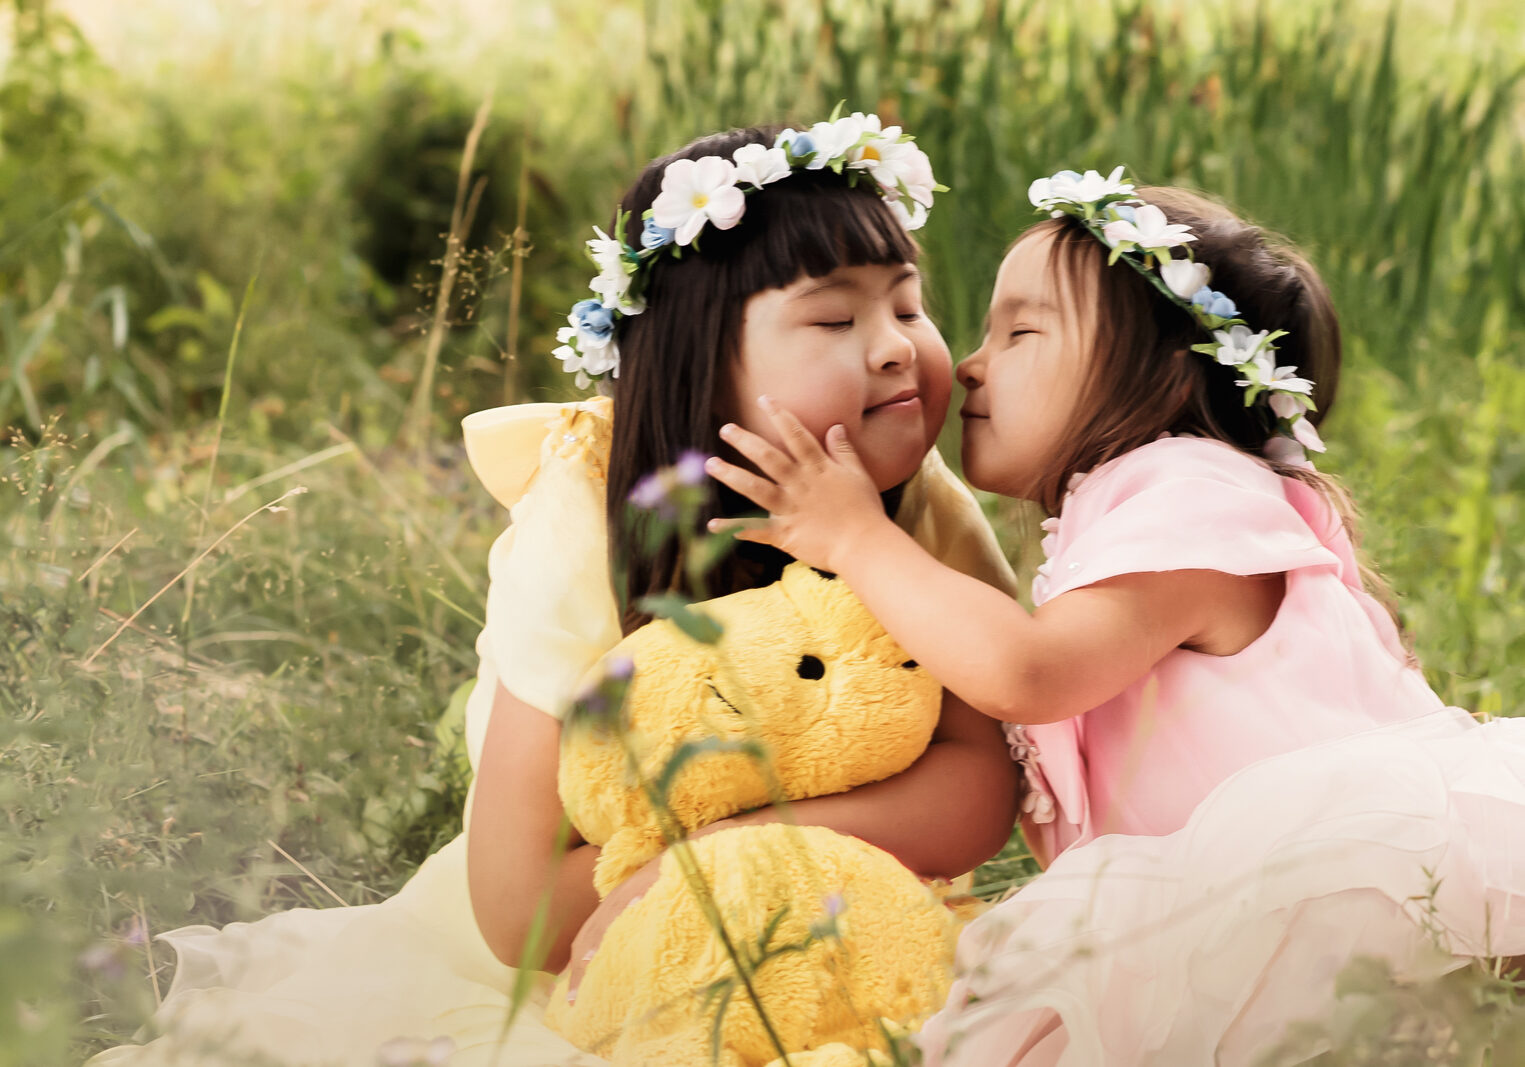 Portrait of two loving sisters wearing princess dresses sitting on a field holding a toy bear.